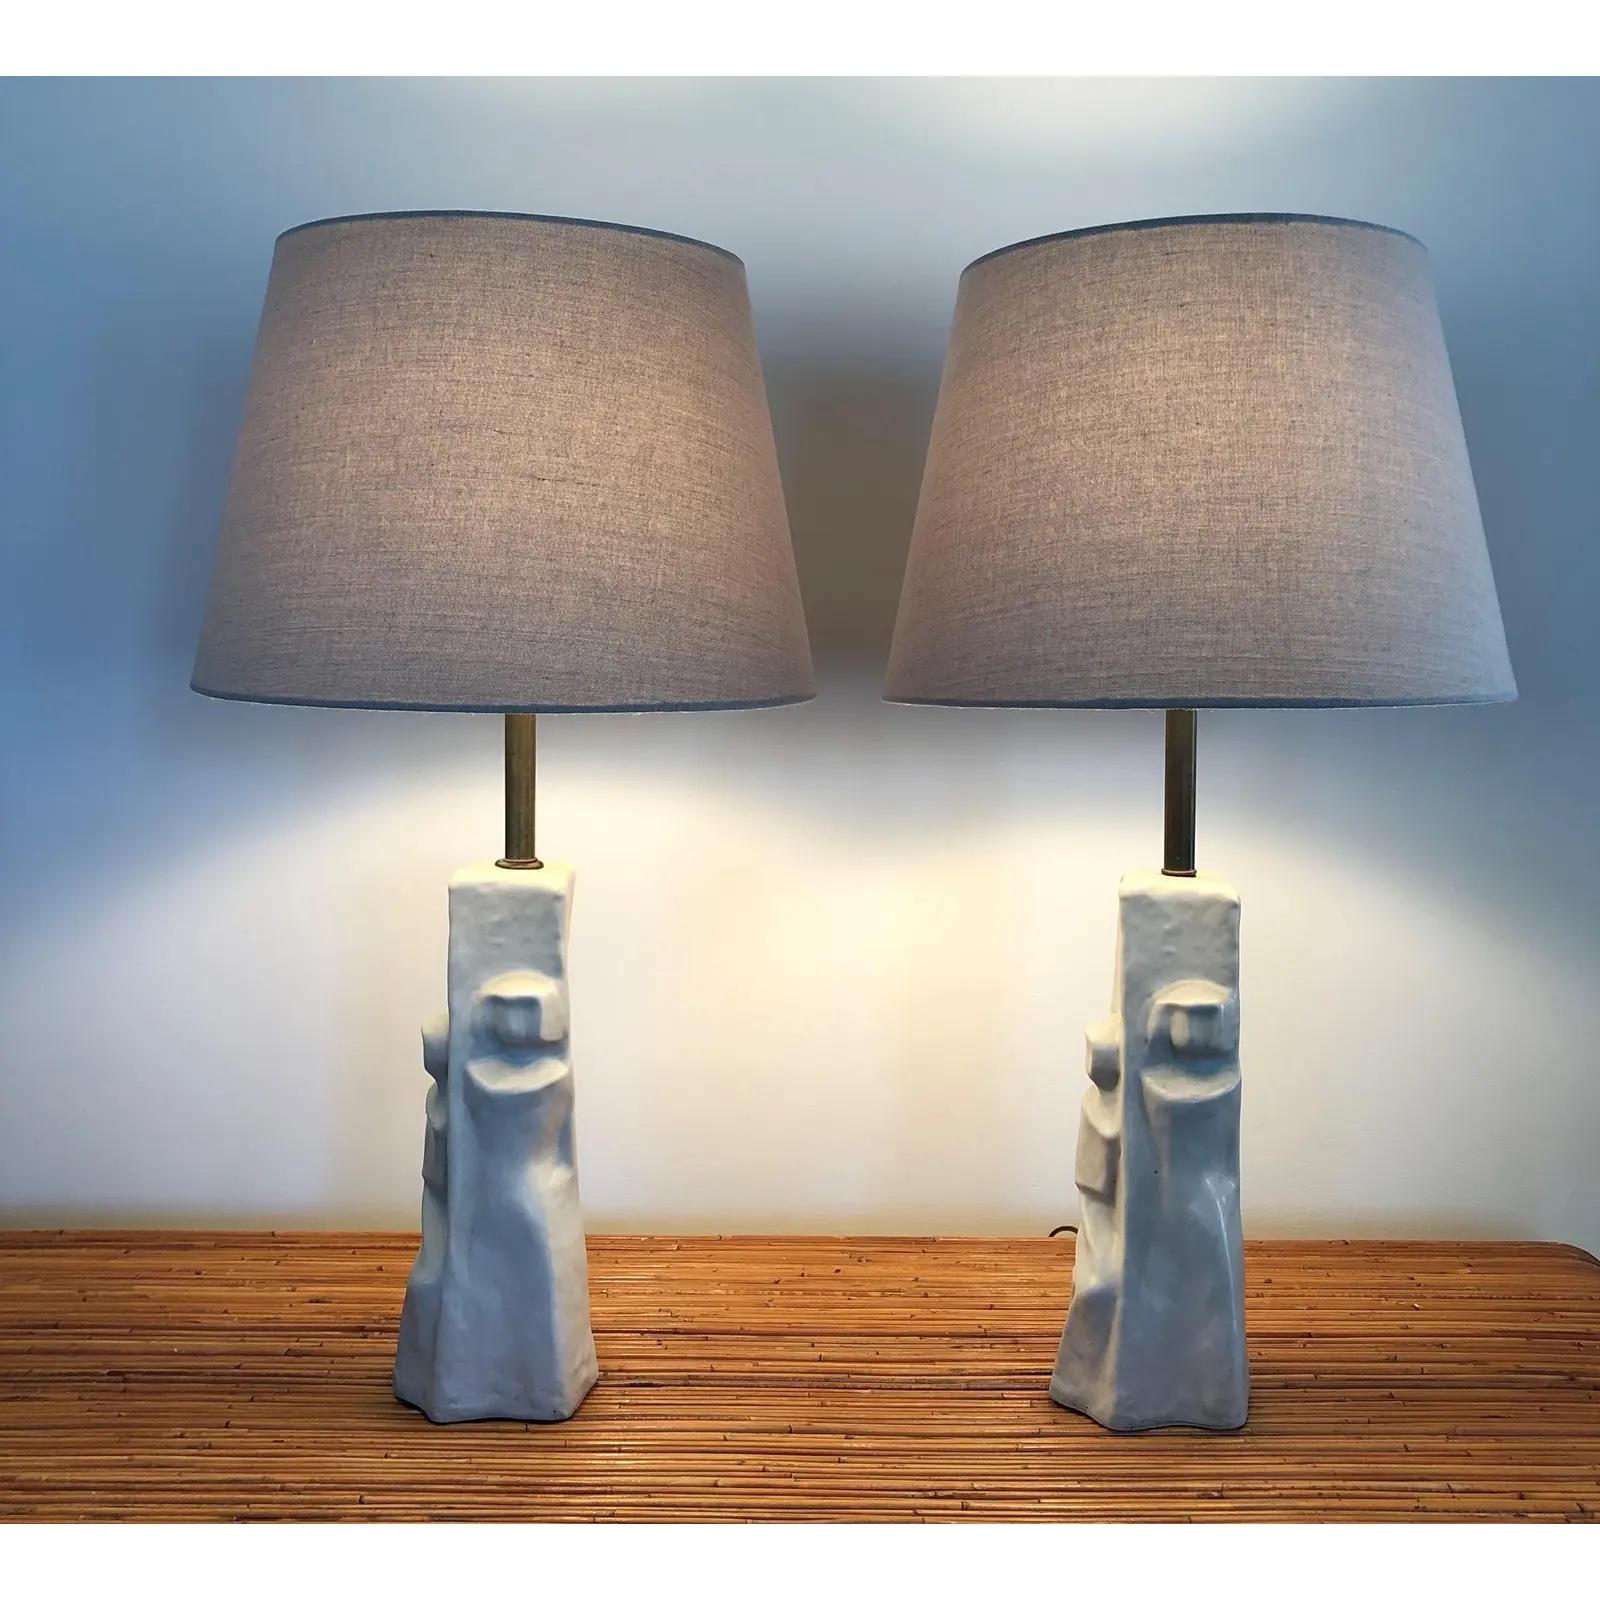 Stunning PAIR of figural ceramic lamps. Screaming mid-century cubism design. Looks like mother and child depiction.
